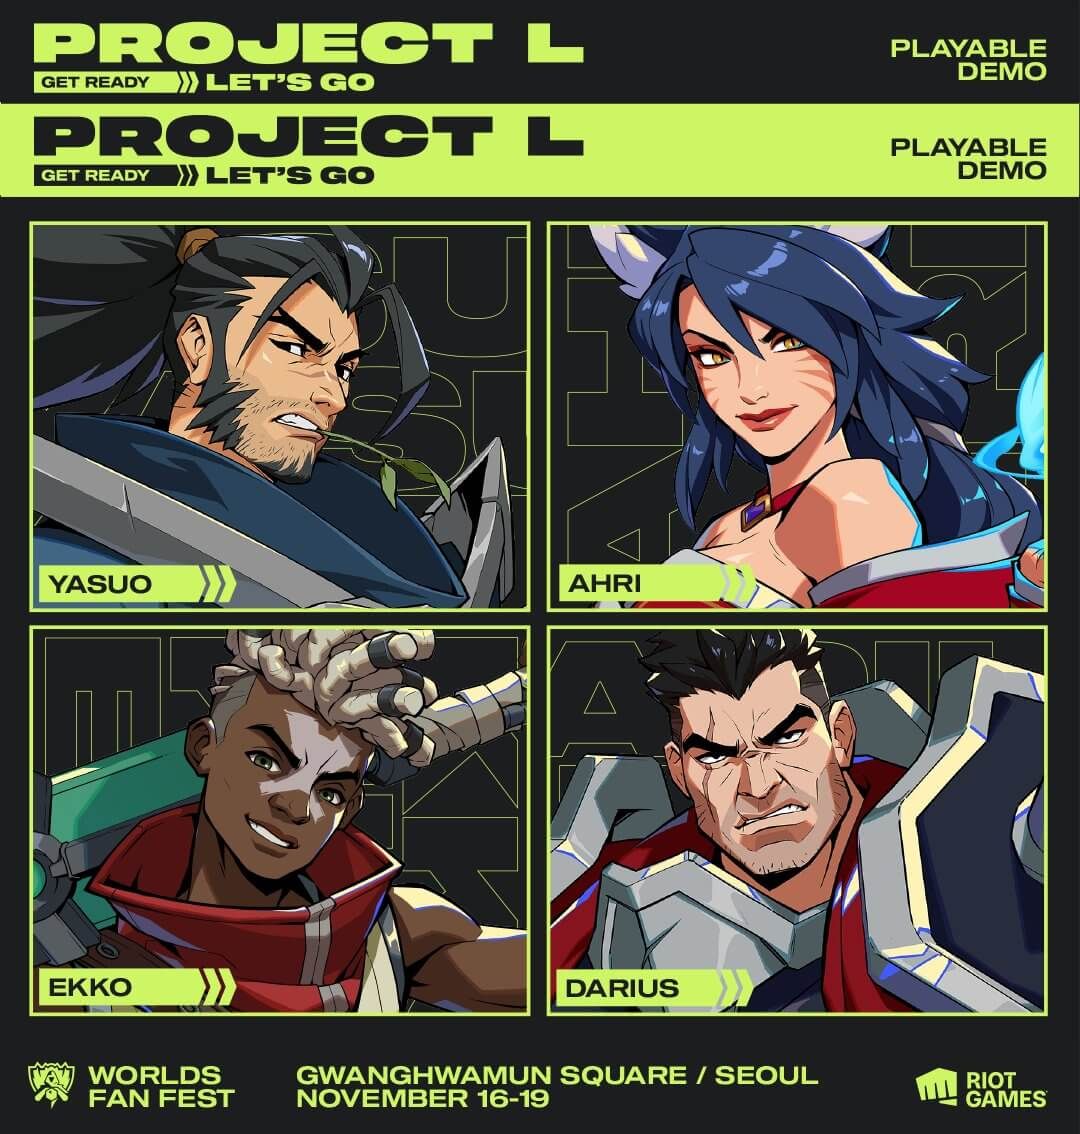 Project L Will Have a Playable Demo at 2023 Worlds Fan Fest